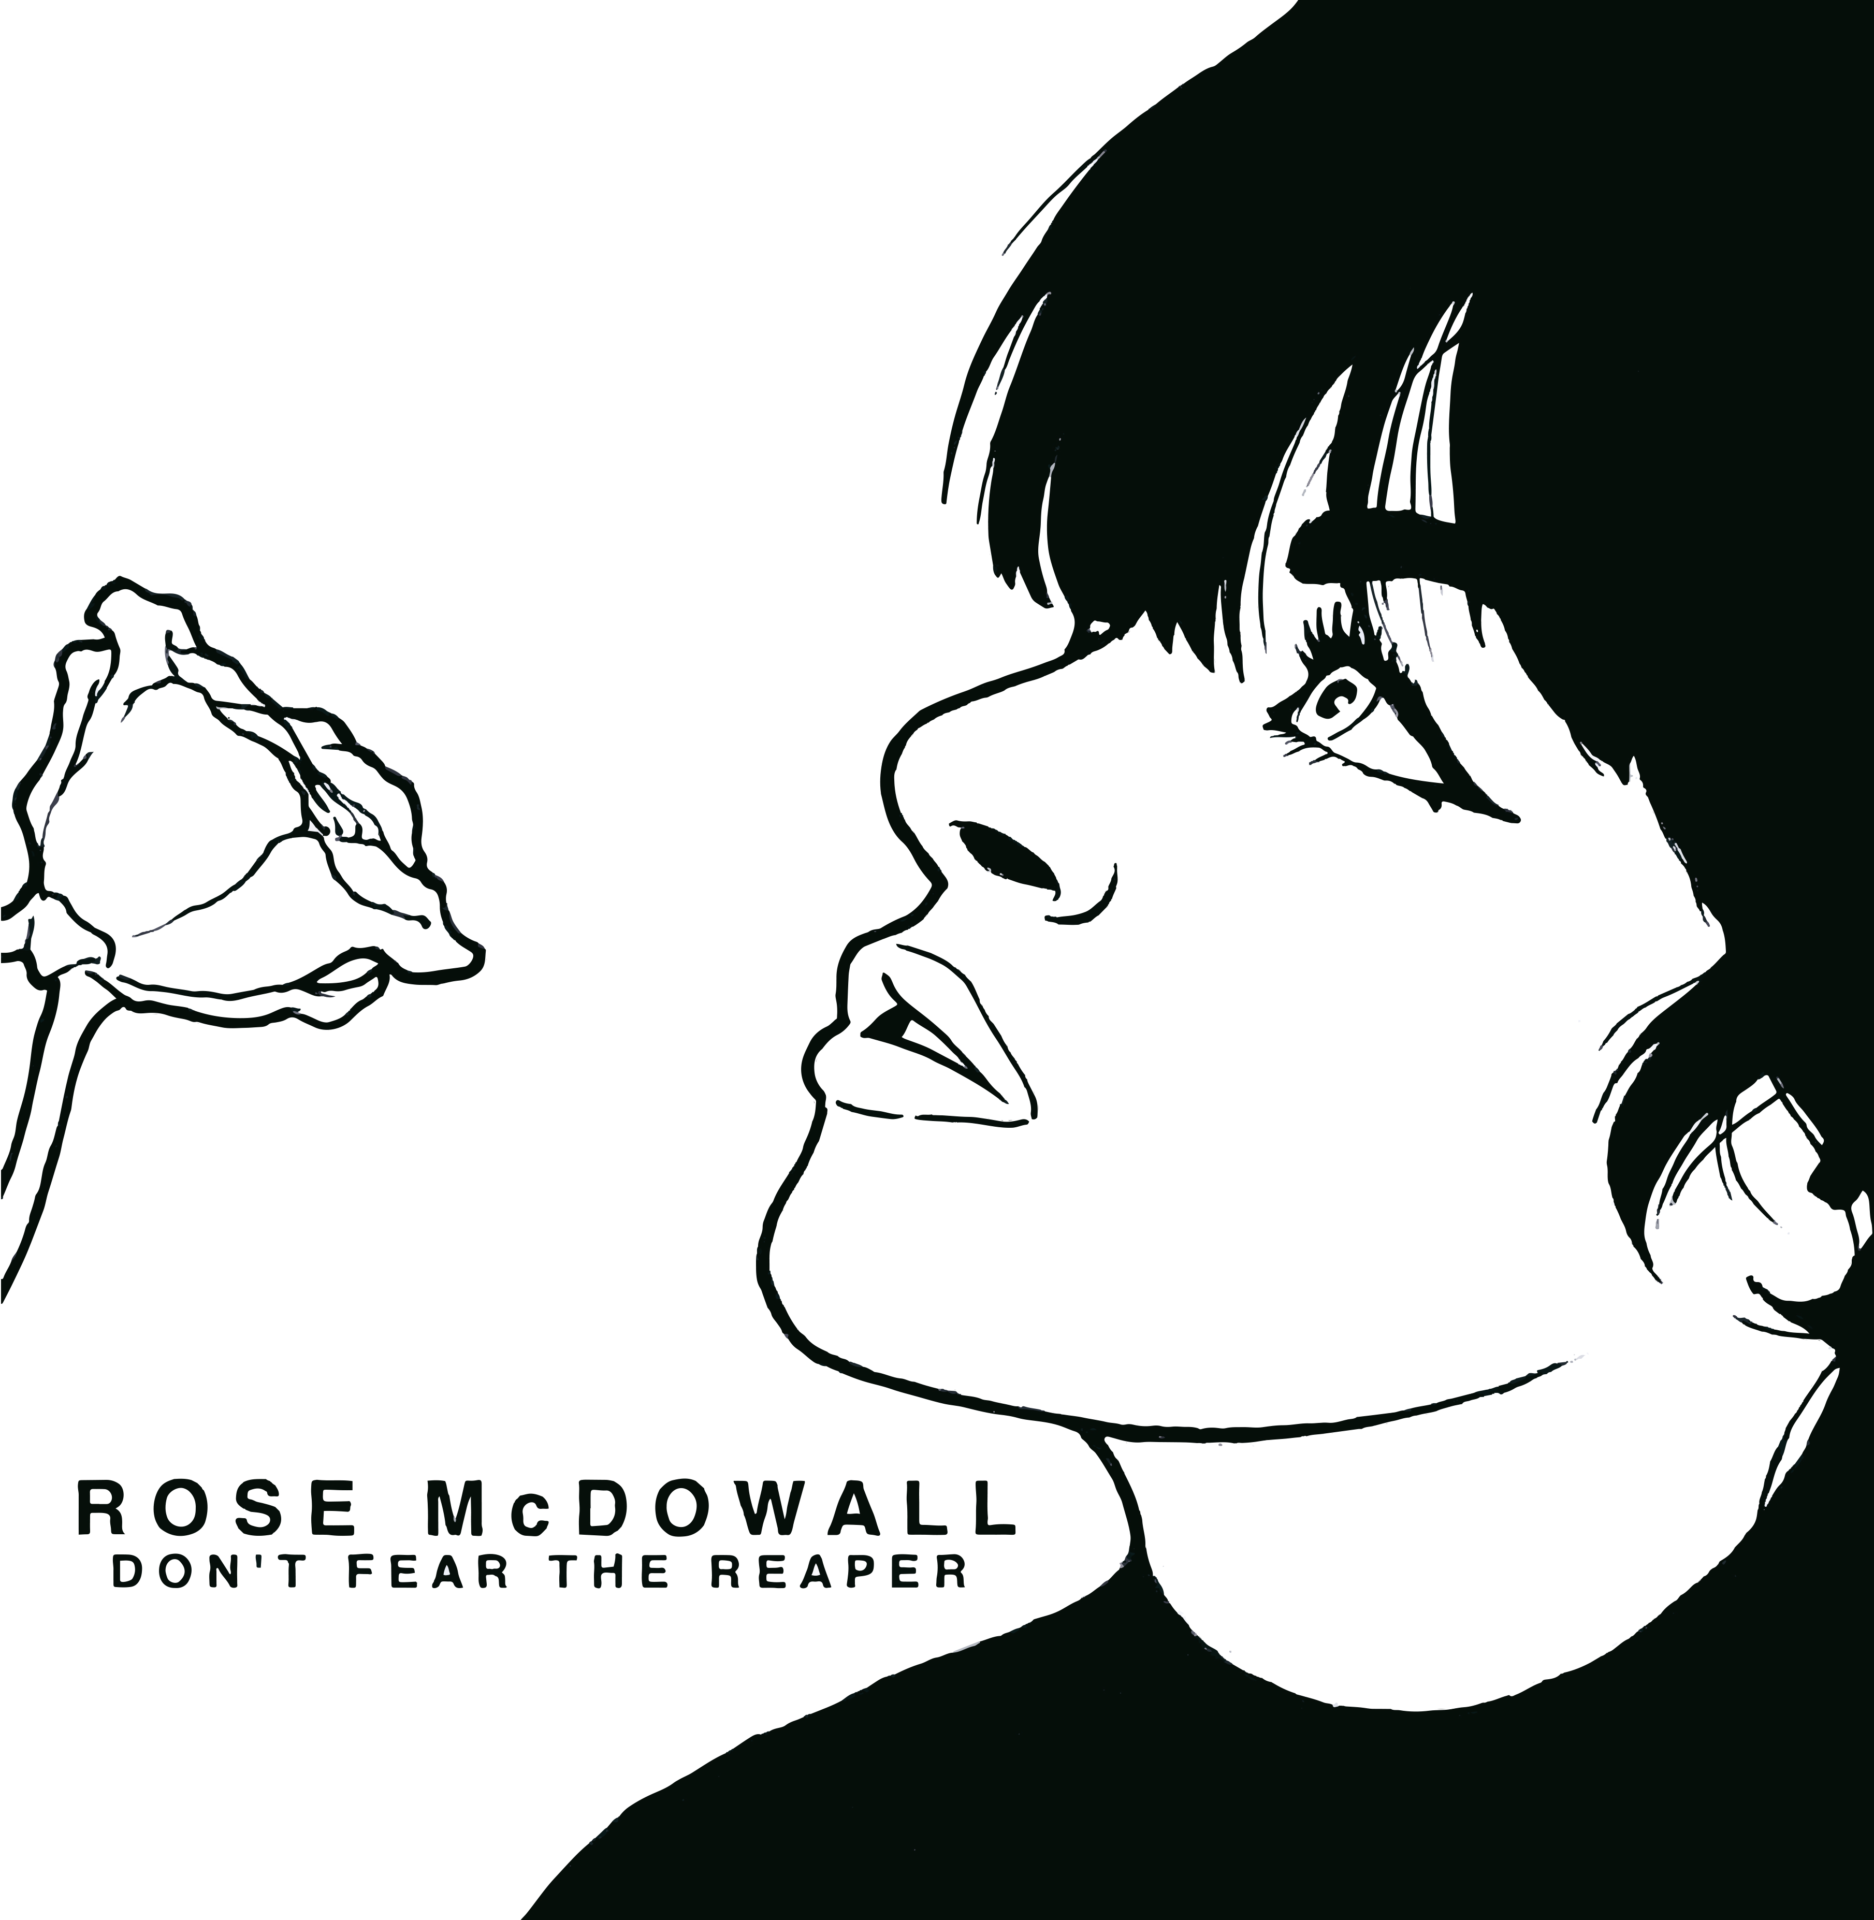 Track Of The Day #661: Rose McDowall - Don't Fear The Reaper (Blue Öyster Cult) 1